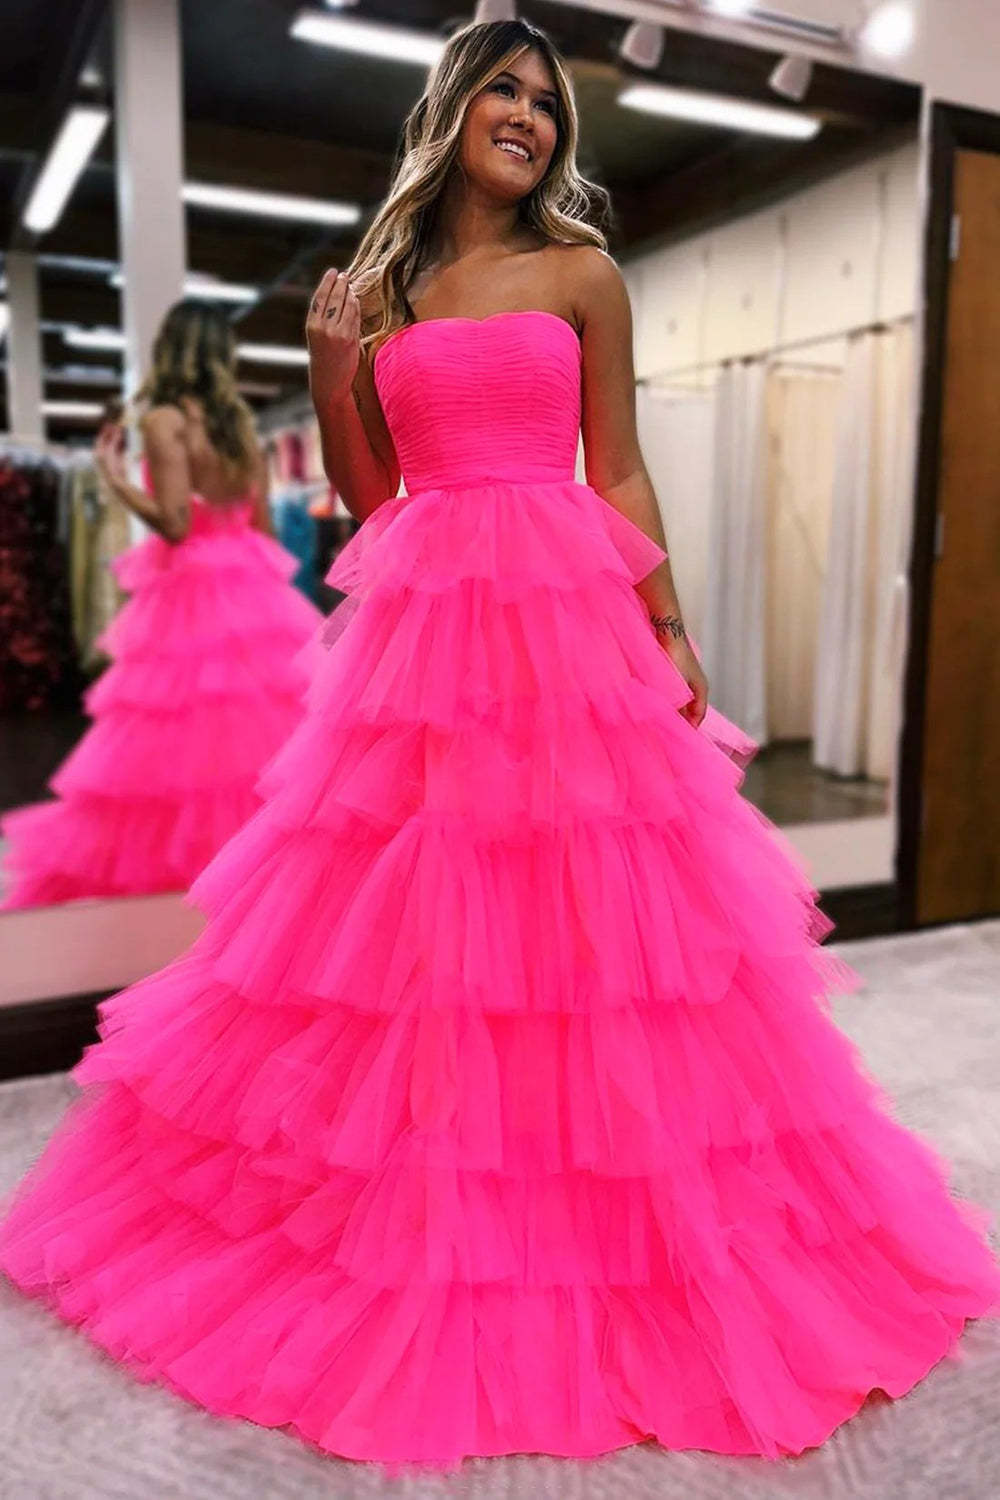 Hellymoon Women Hot Pink Long Prom Dress A Line Straples Formal Dress with Ruffles